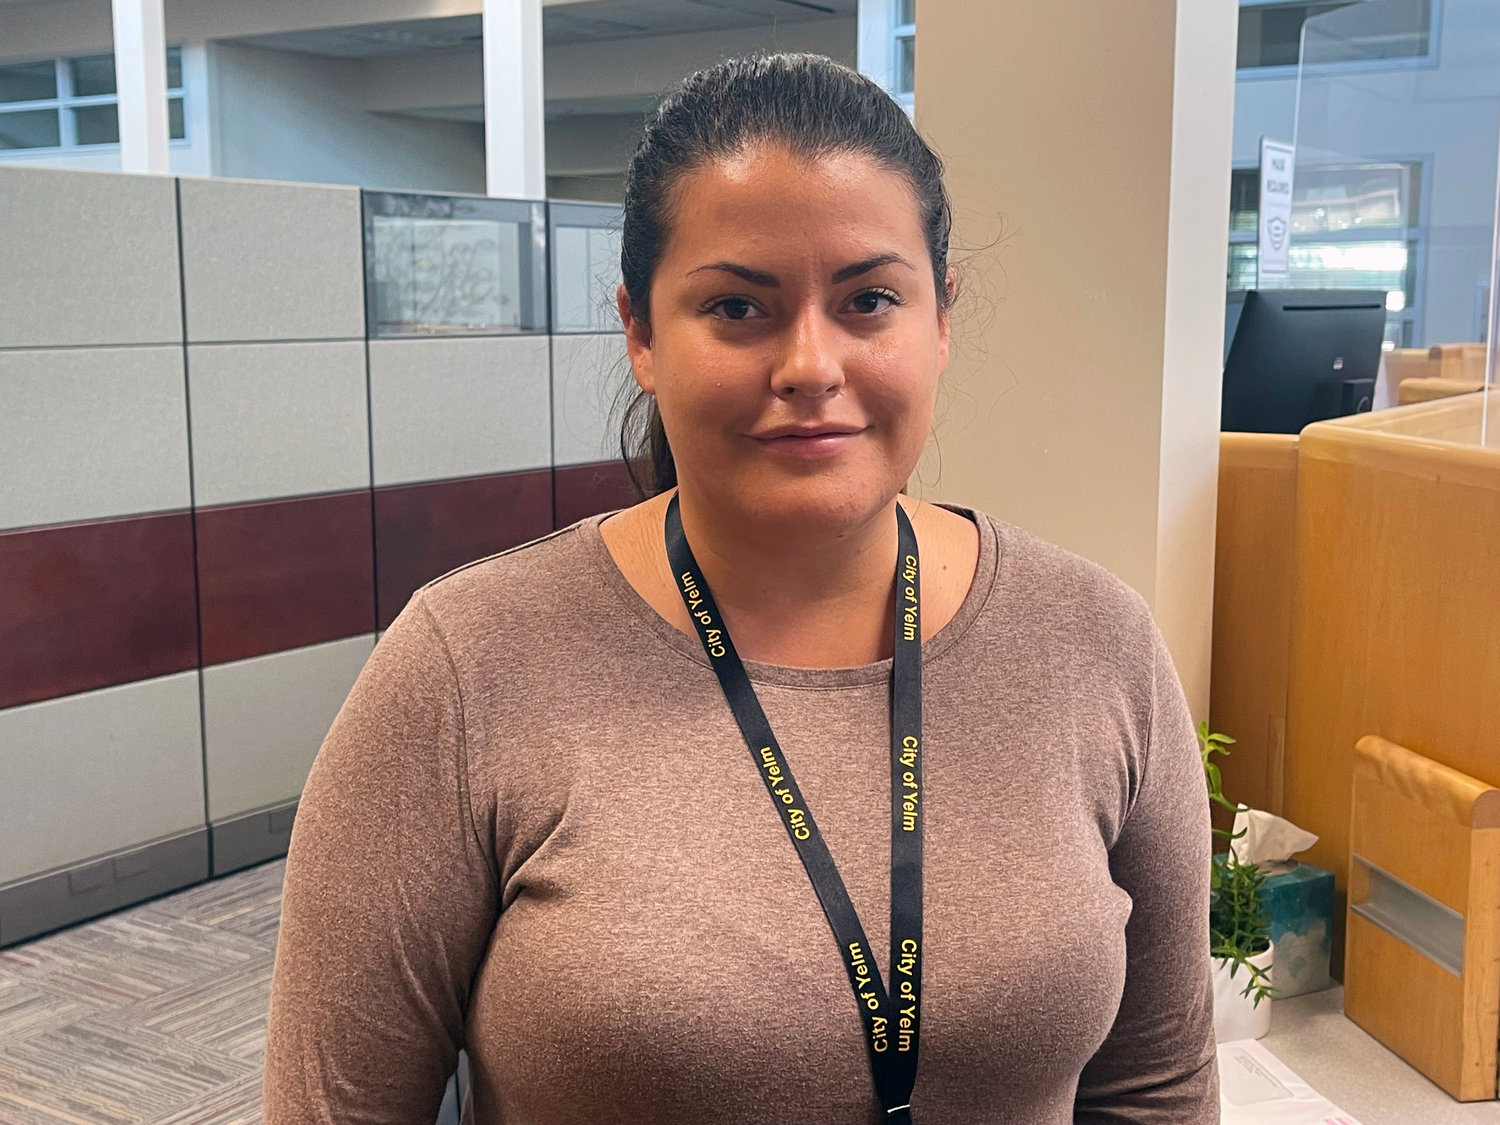 Rainier resident Savana Cervantes started her job this month as the new administrative assistant for the city of Yelm.